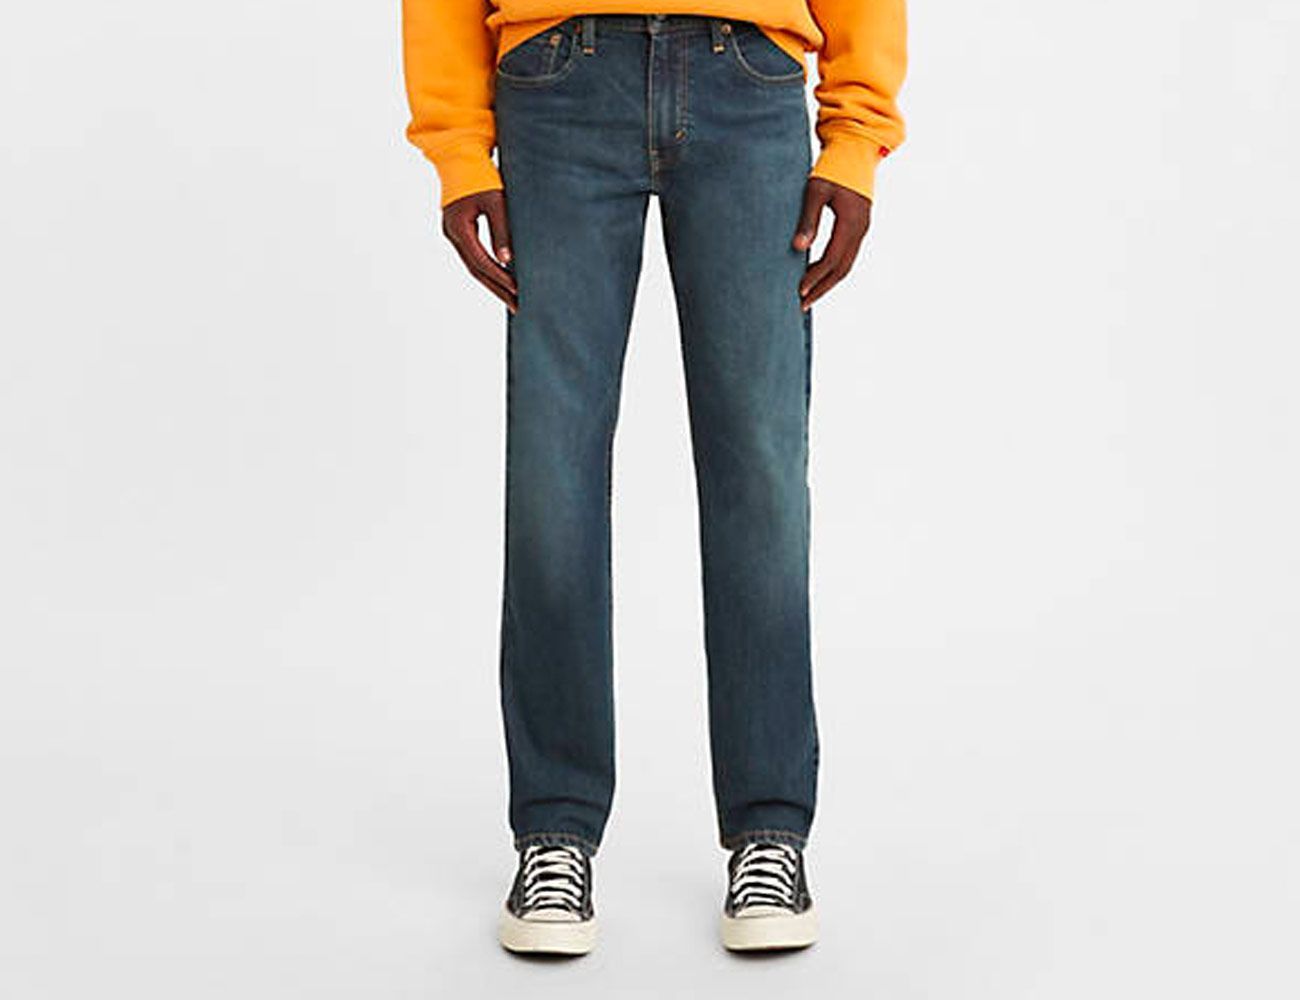 Levis Commuter Jeans On Clearance, Save 70% 